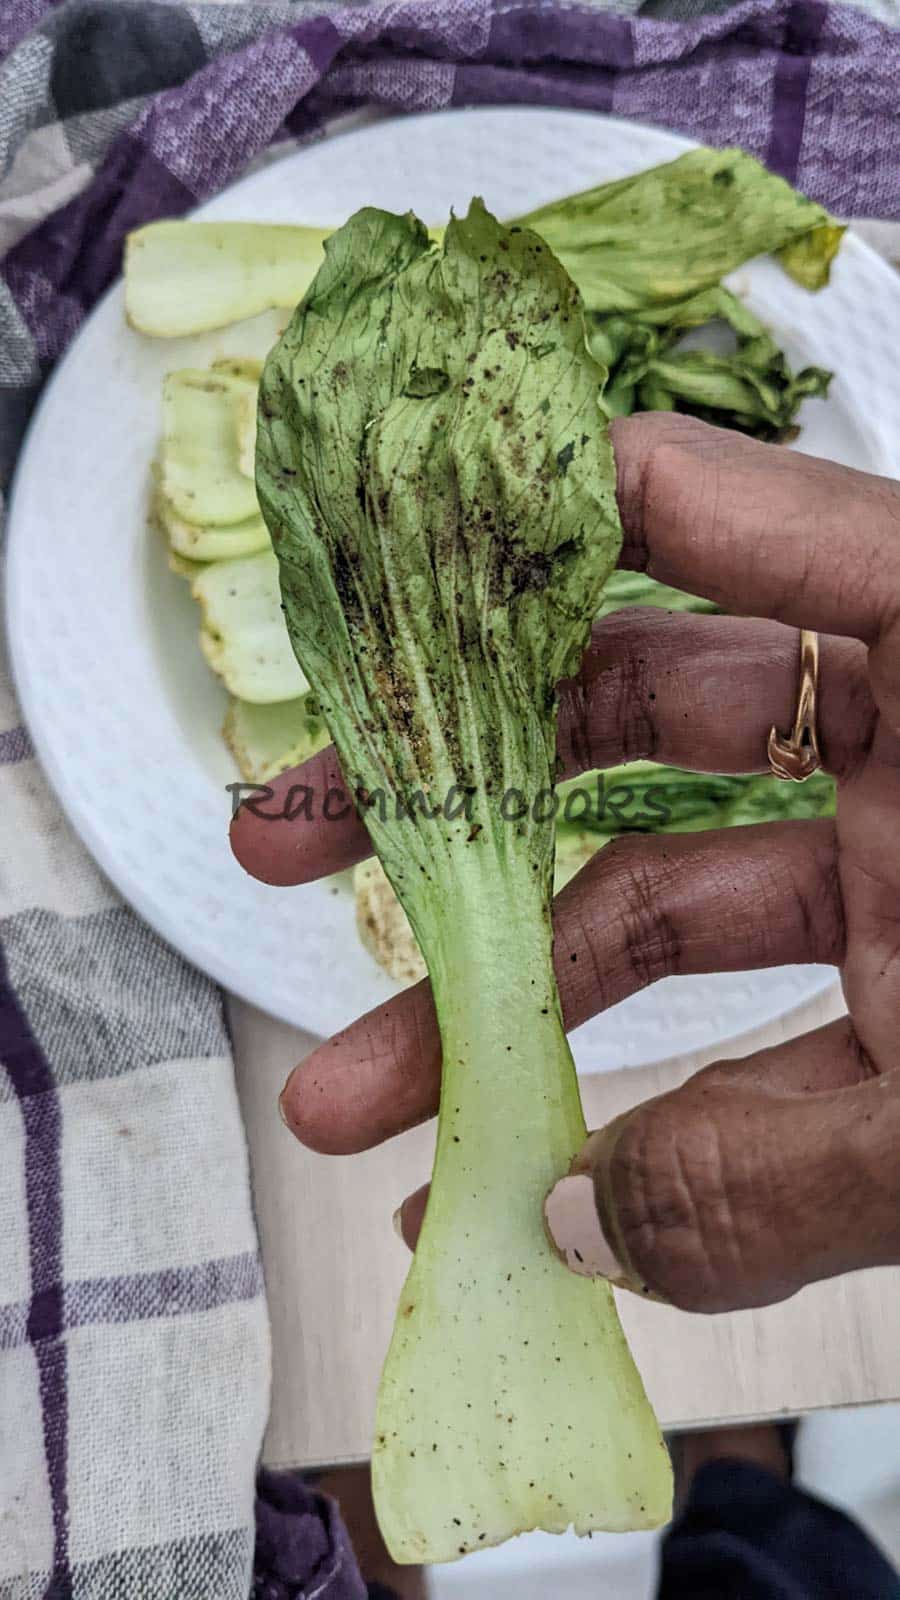 One bok choy leaf held in hand after air frying.